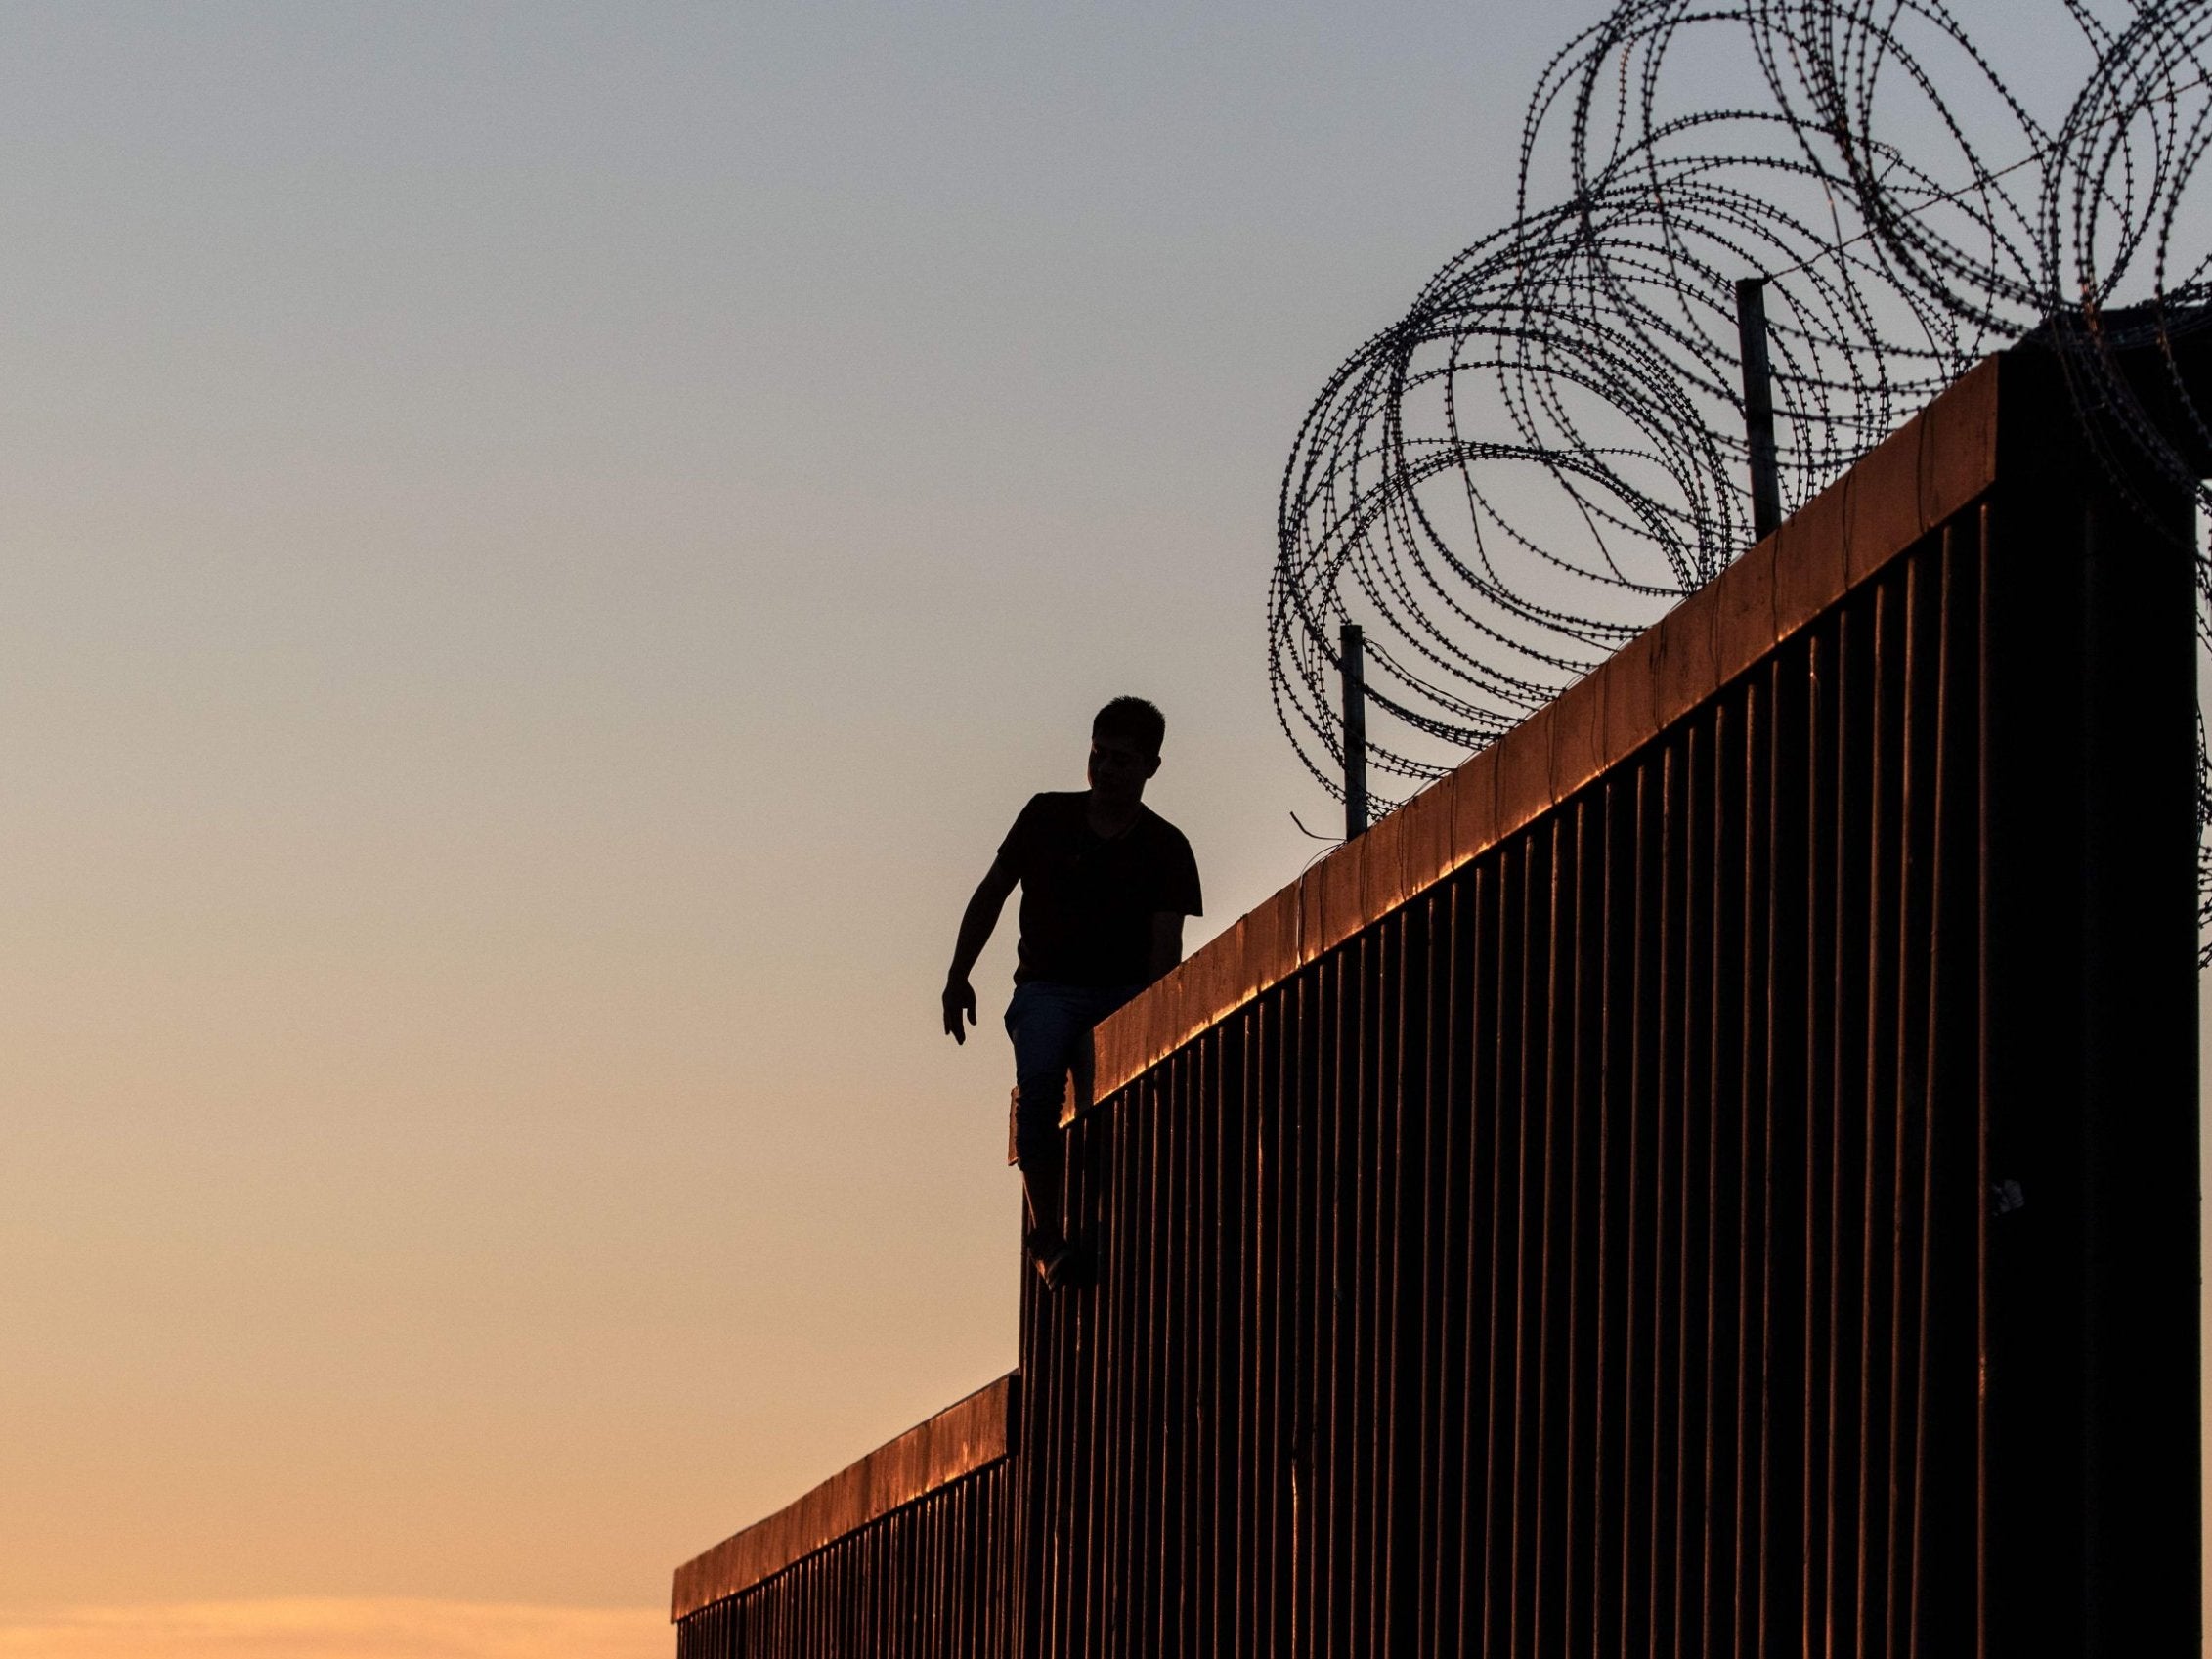 A man walks along the top of the fence separating the US and Mexico in California